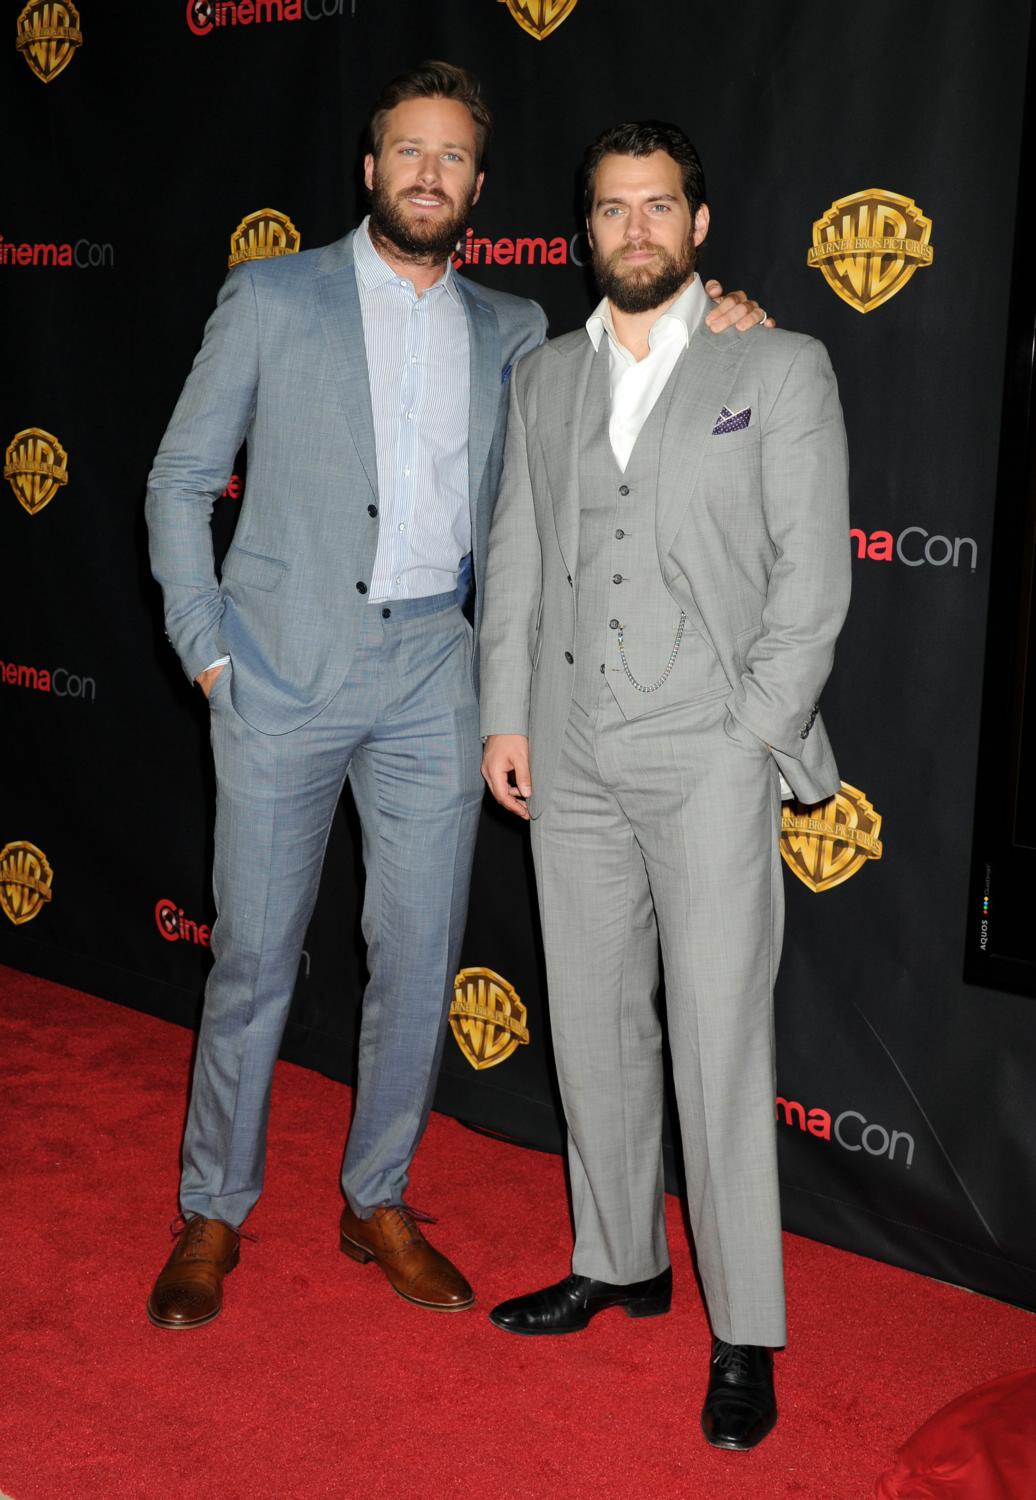 Armie Hammer and Henry Cavill at WB Cinemacon Red Carpet